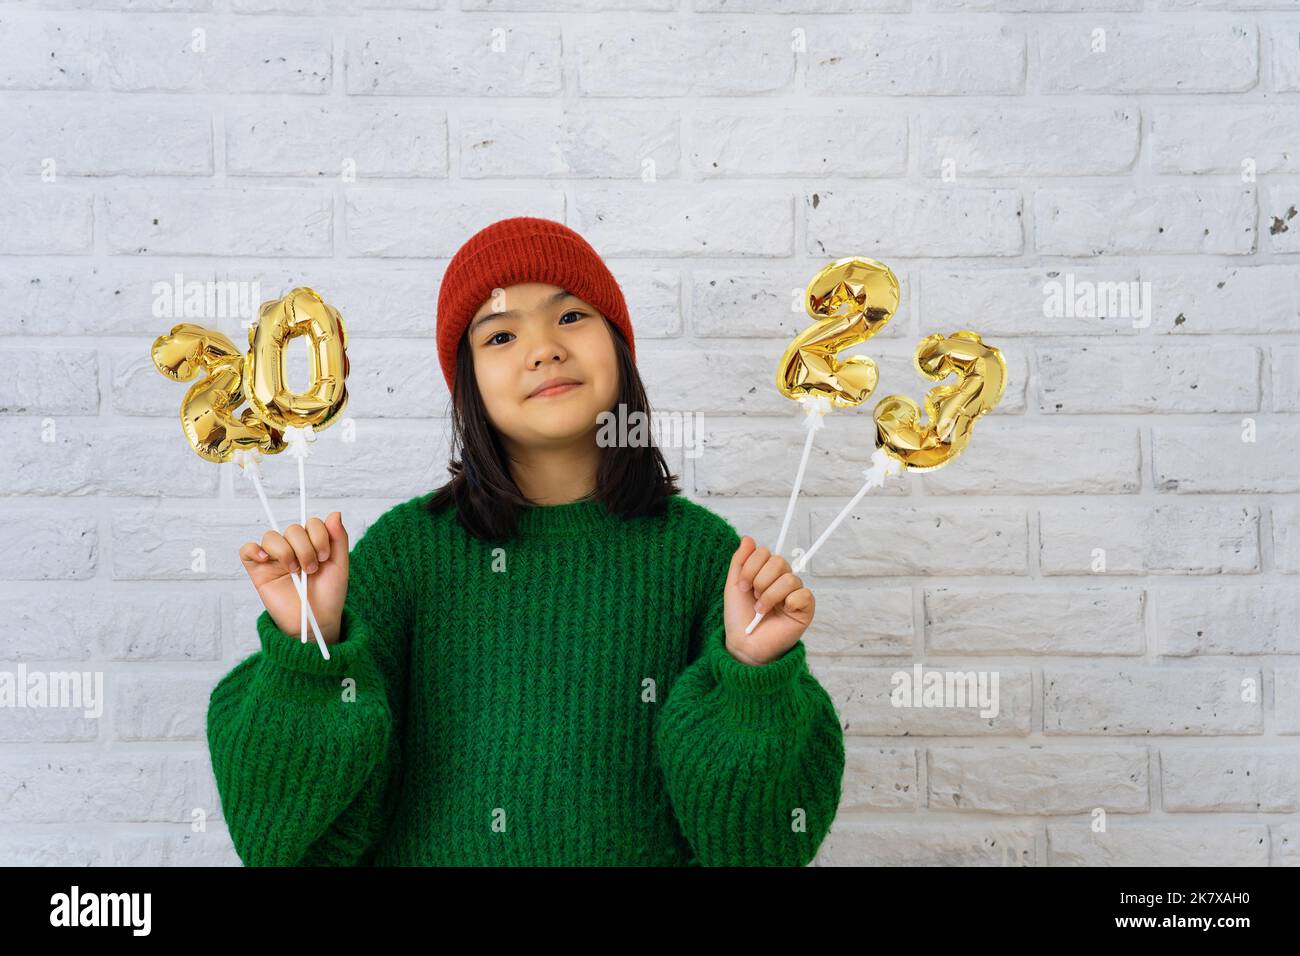 Asian cute girl in red cap and green sweater holding foil balloons with numbers 2023. Copy space, brick white wall background Stock Photo